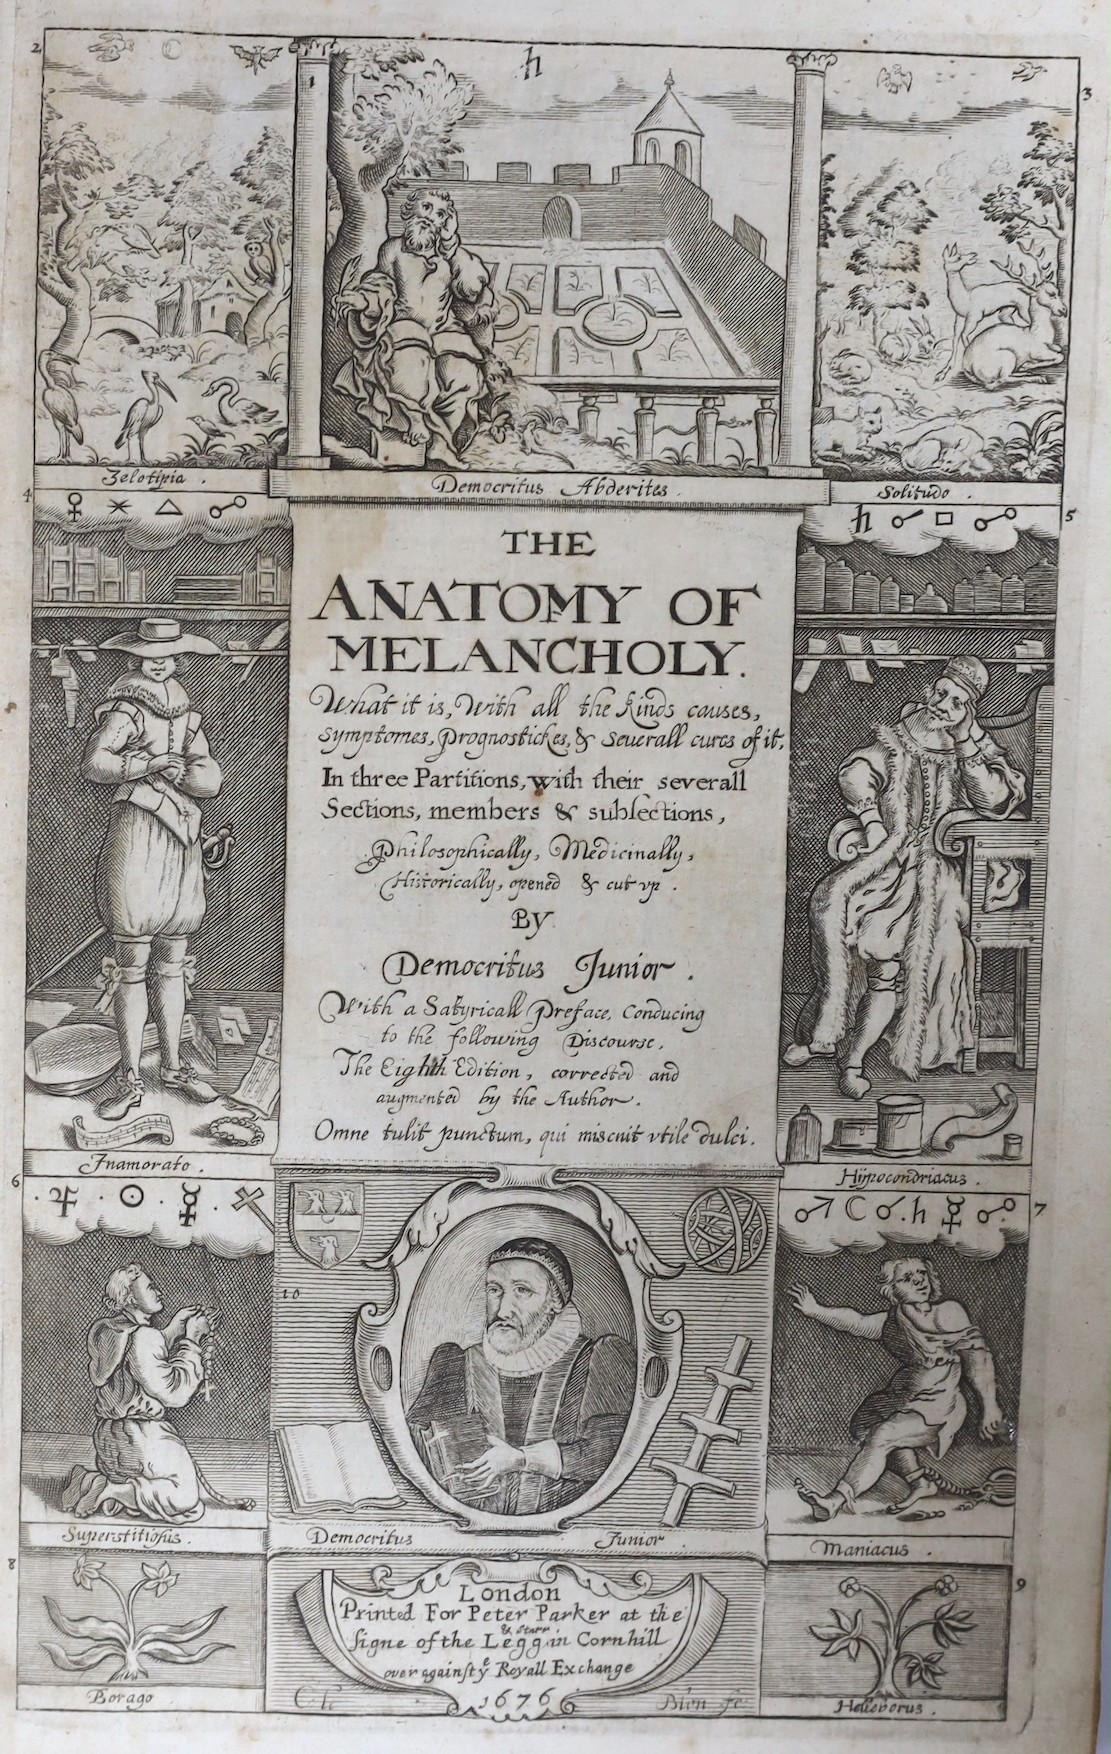 Democritus Junior [Burton, Robert] - The Anatomy of Melancholy, 8th edition, engraved pictorial title page incorporating a portrait of the author, folio, original calf, covers detached, bookplate of Archdeacon Browne, Pe